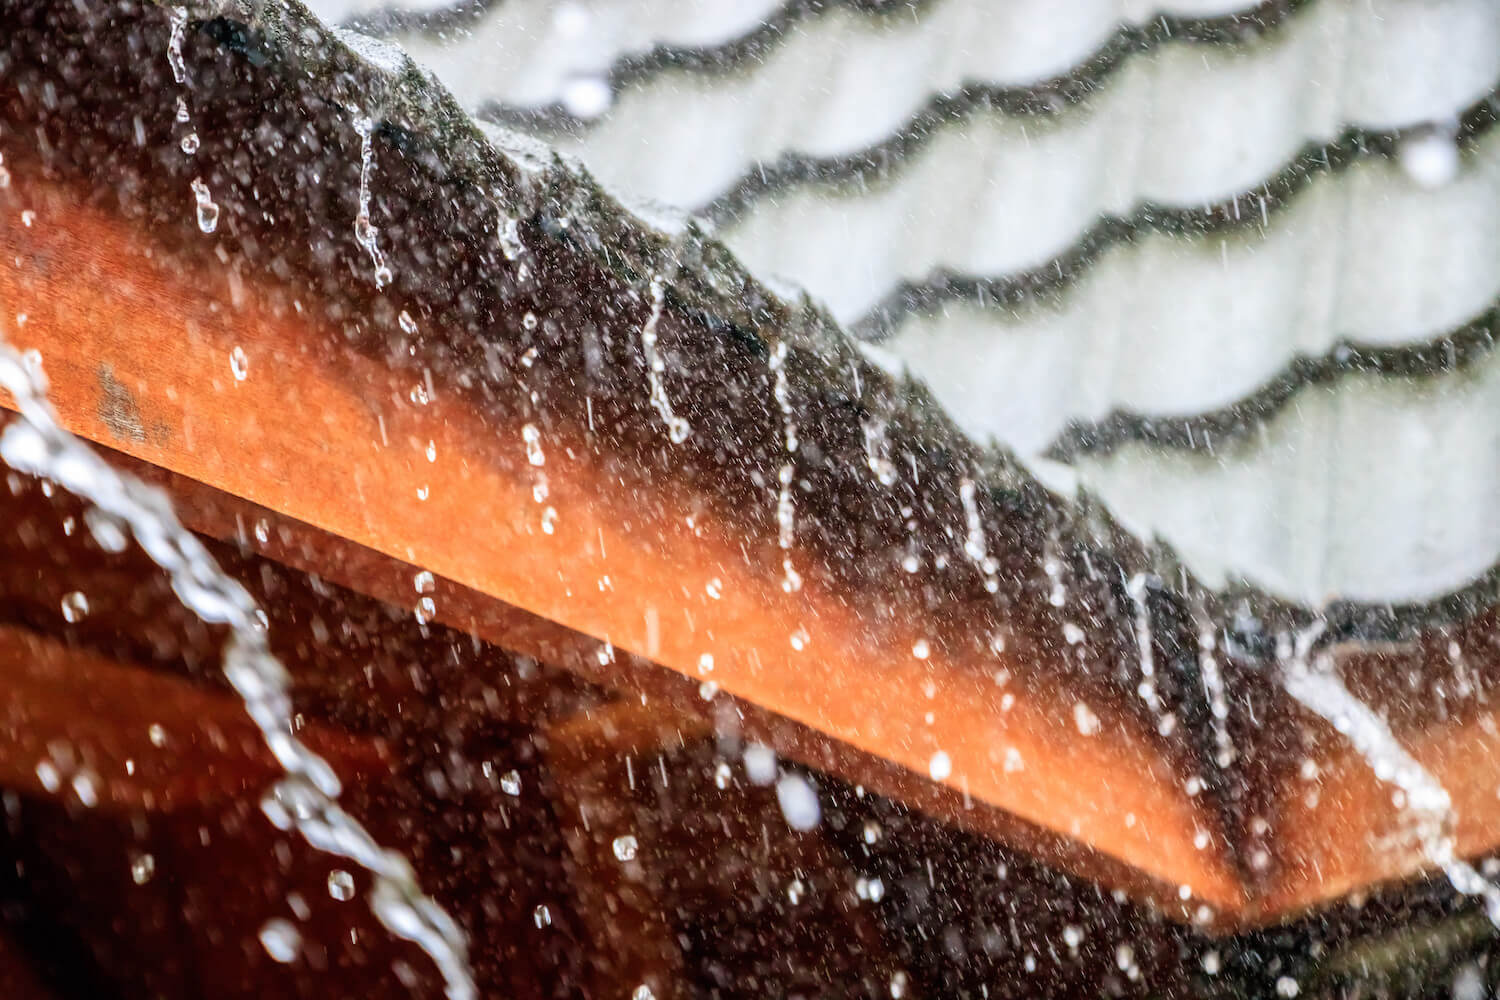 Roofing In Extreme Conditions How To Keep Your Home Safe In All Seasons